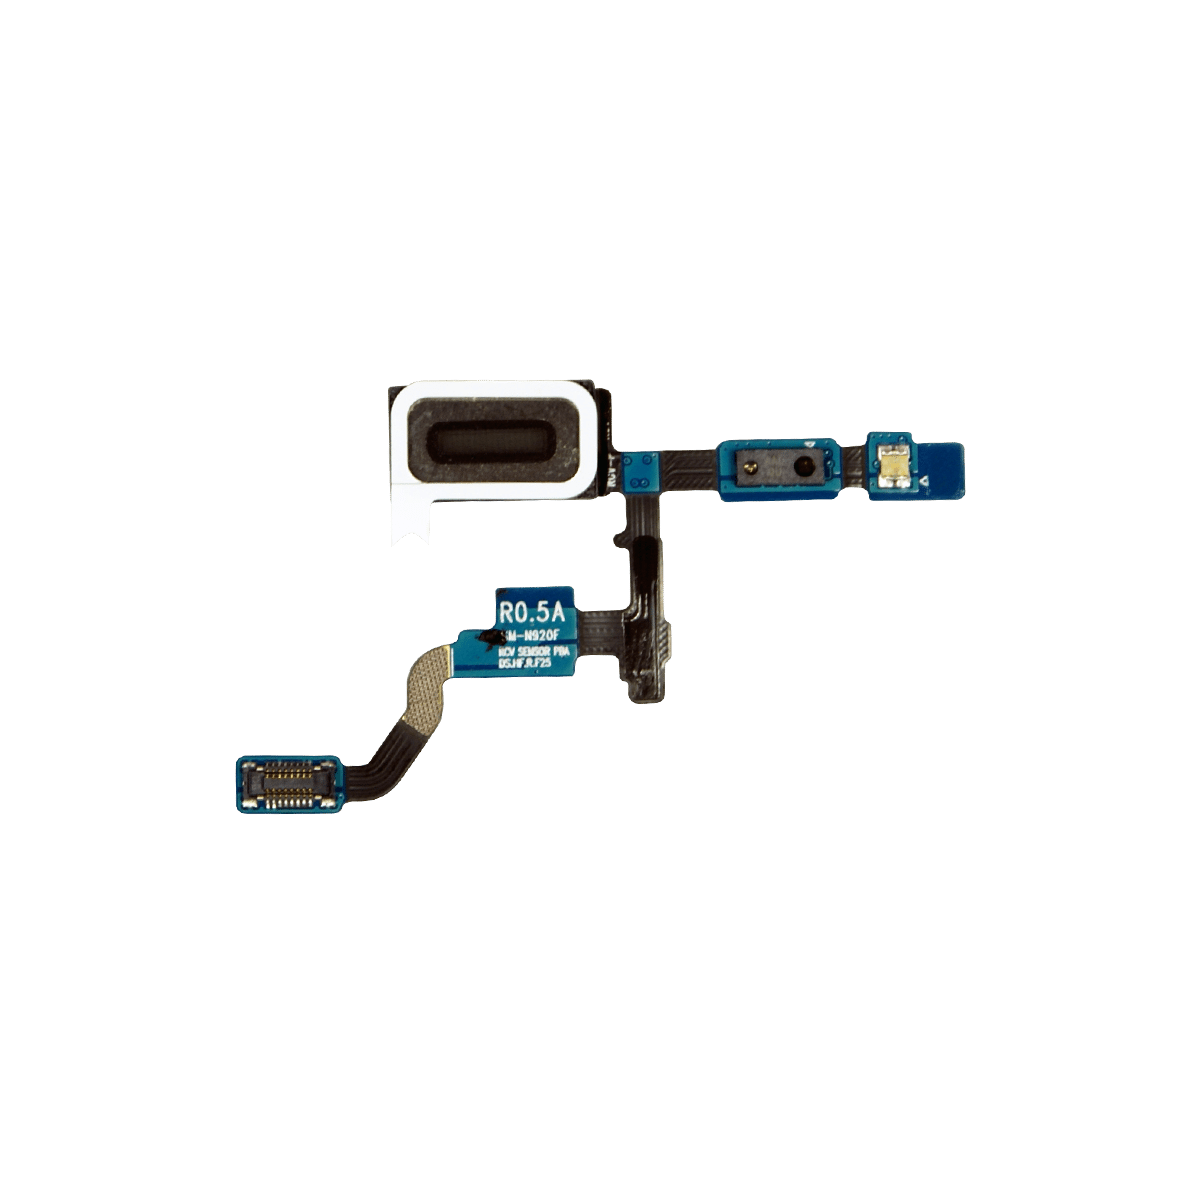 Samsung Galaxy Note 5 N920F Ear Speaker & Light Sensor Flex Cable Replacement